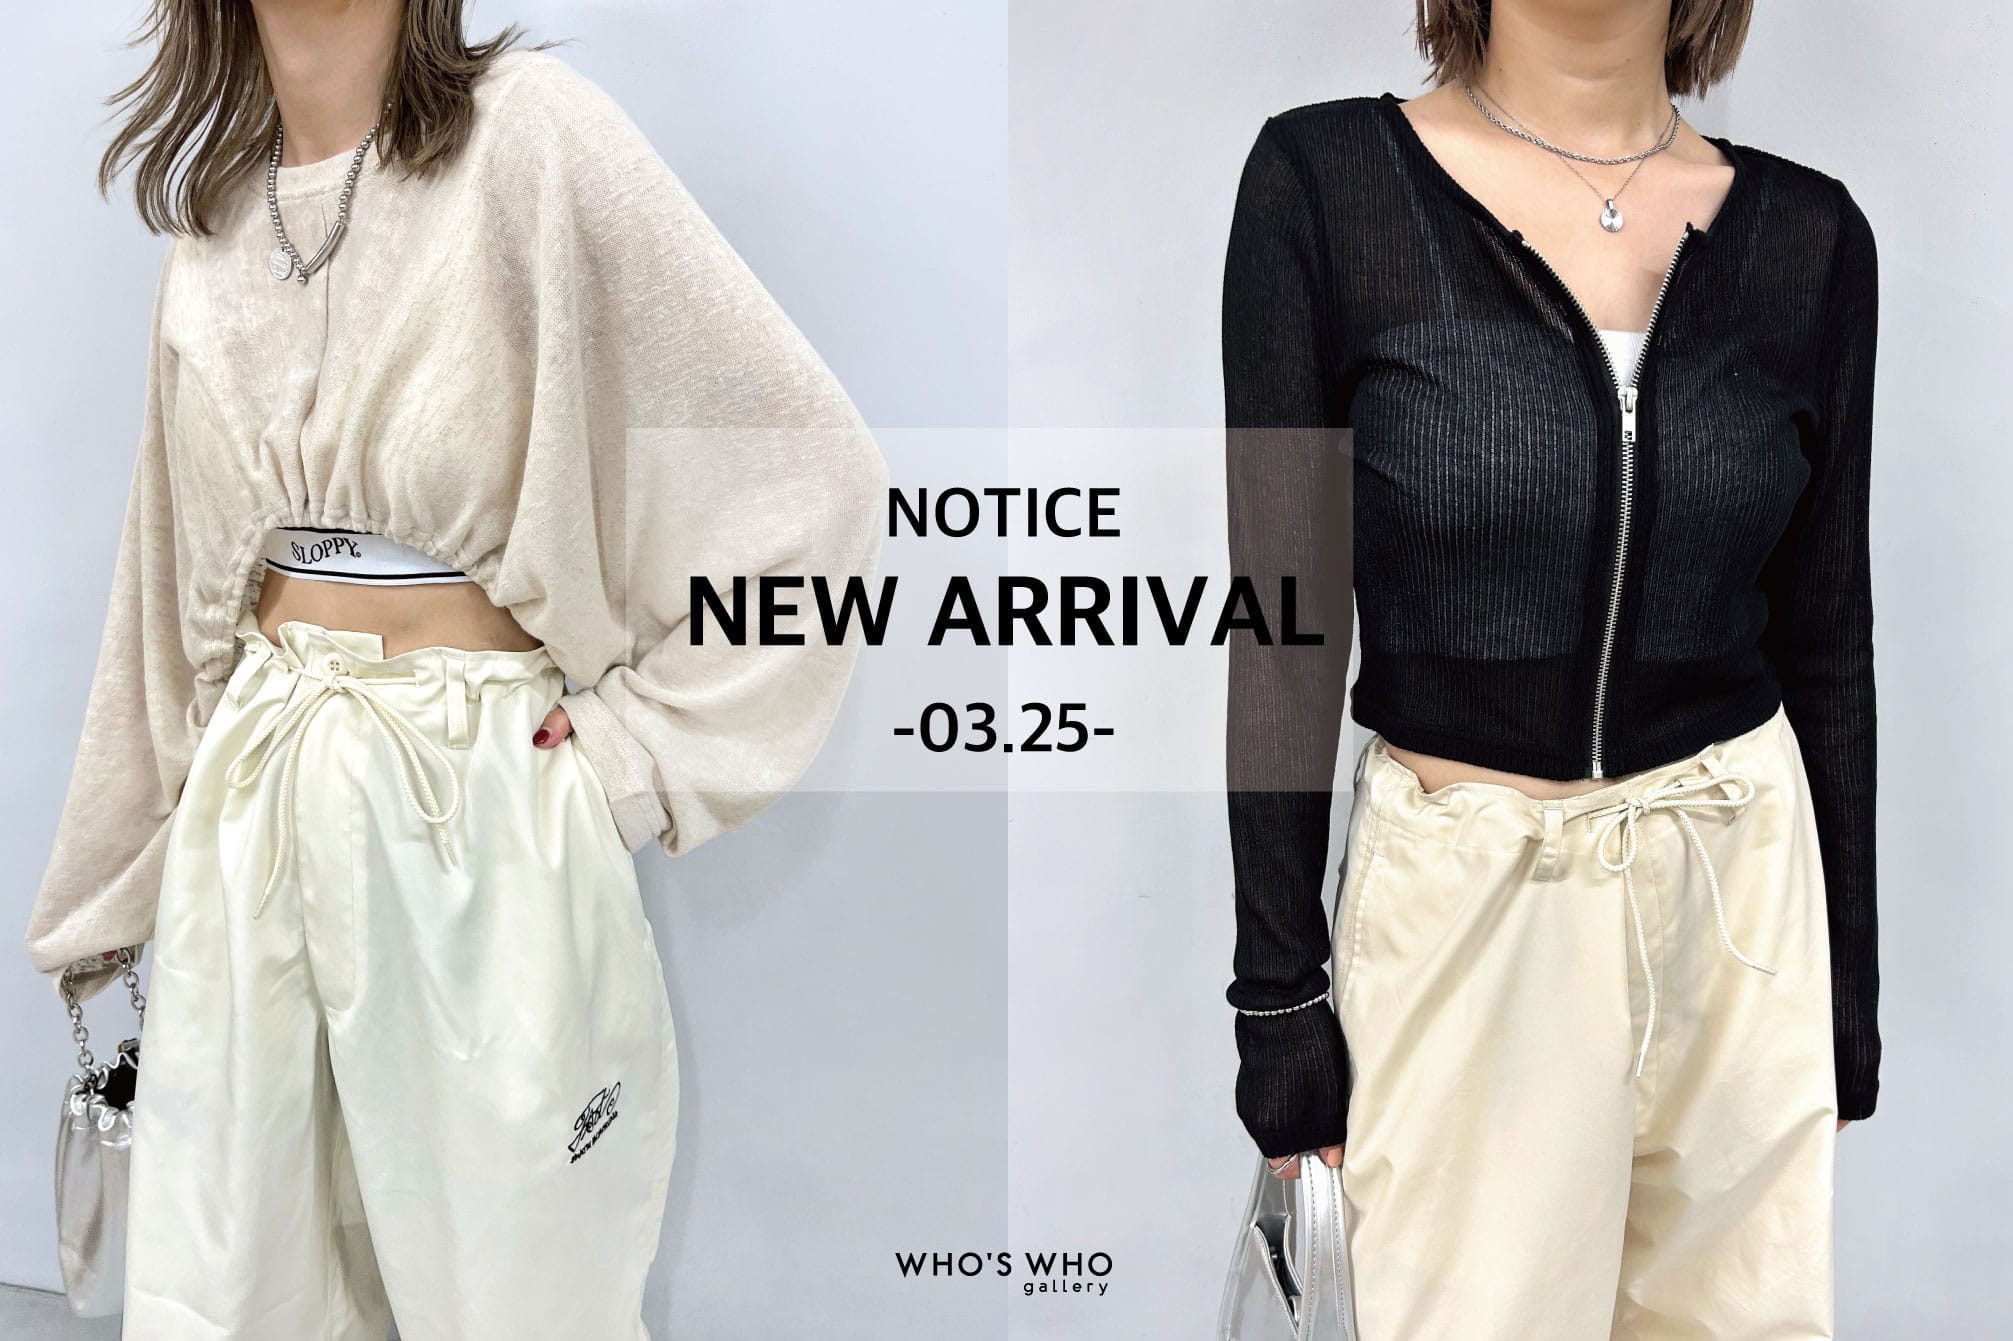 WHO’S WHO gallery 【NEW ARRIVAL NOTICE-03.25-】